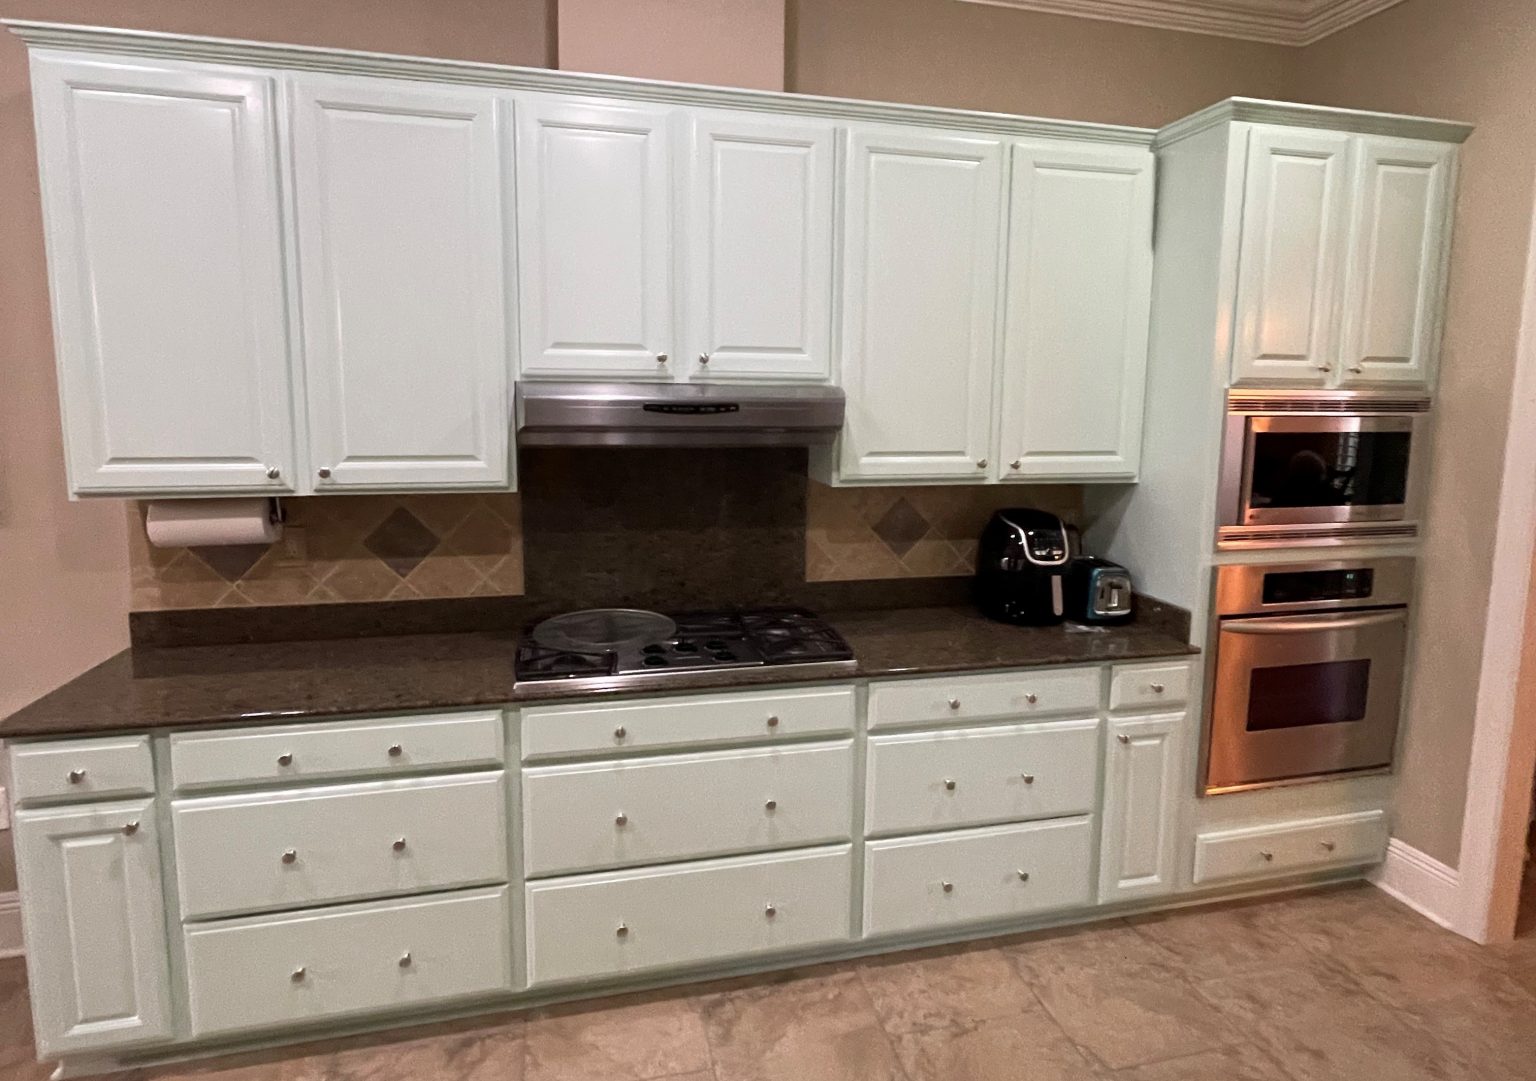 kitchen cabinets on wall repainted